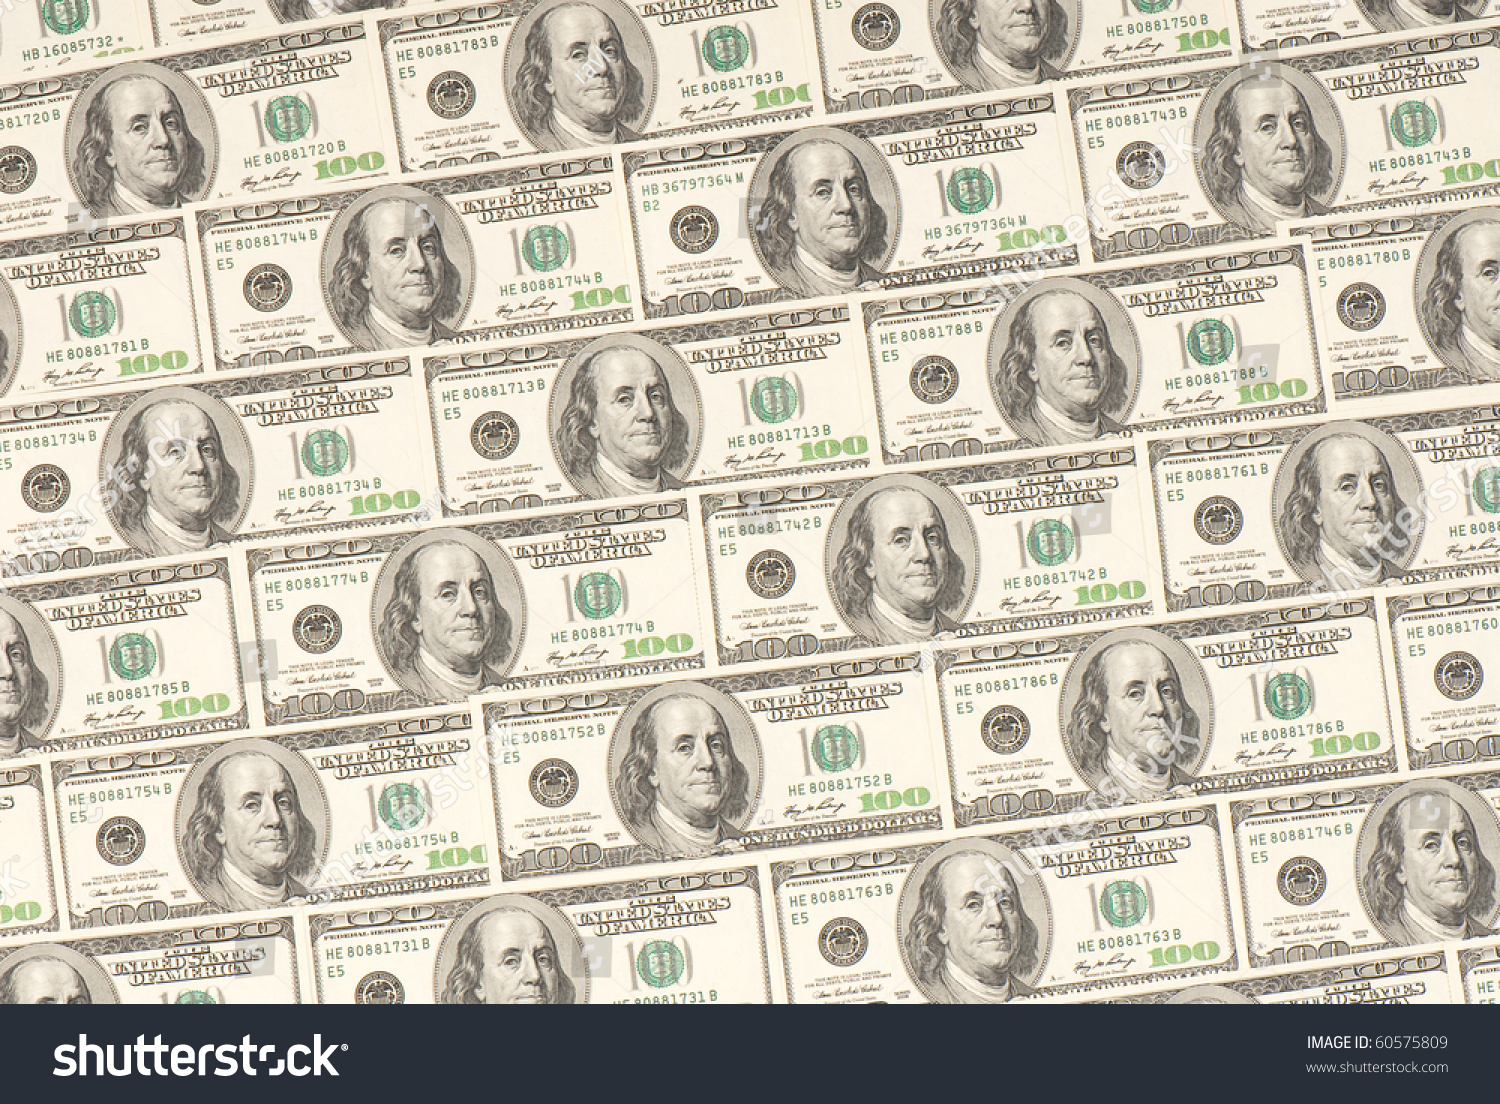 Background American Money High Resolution Concept Stock Photo